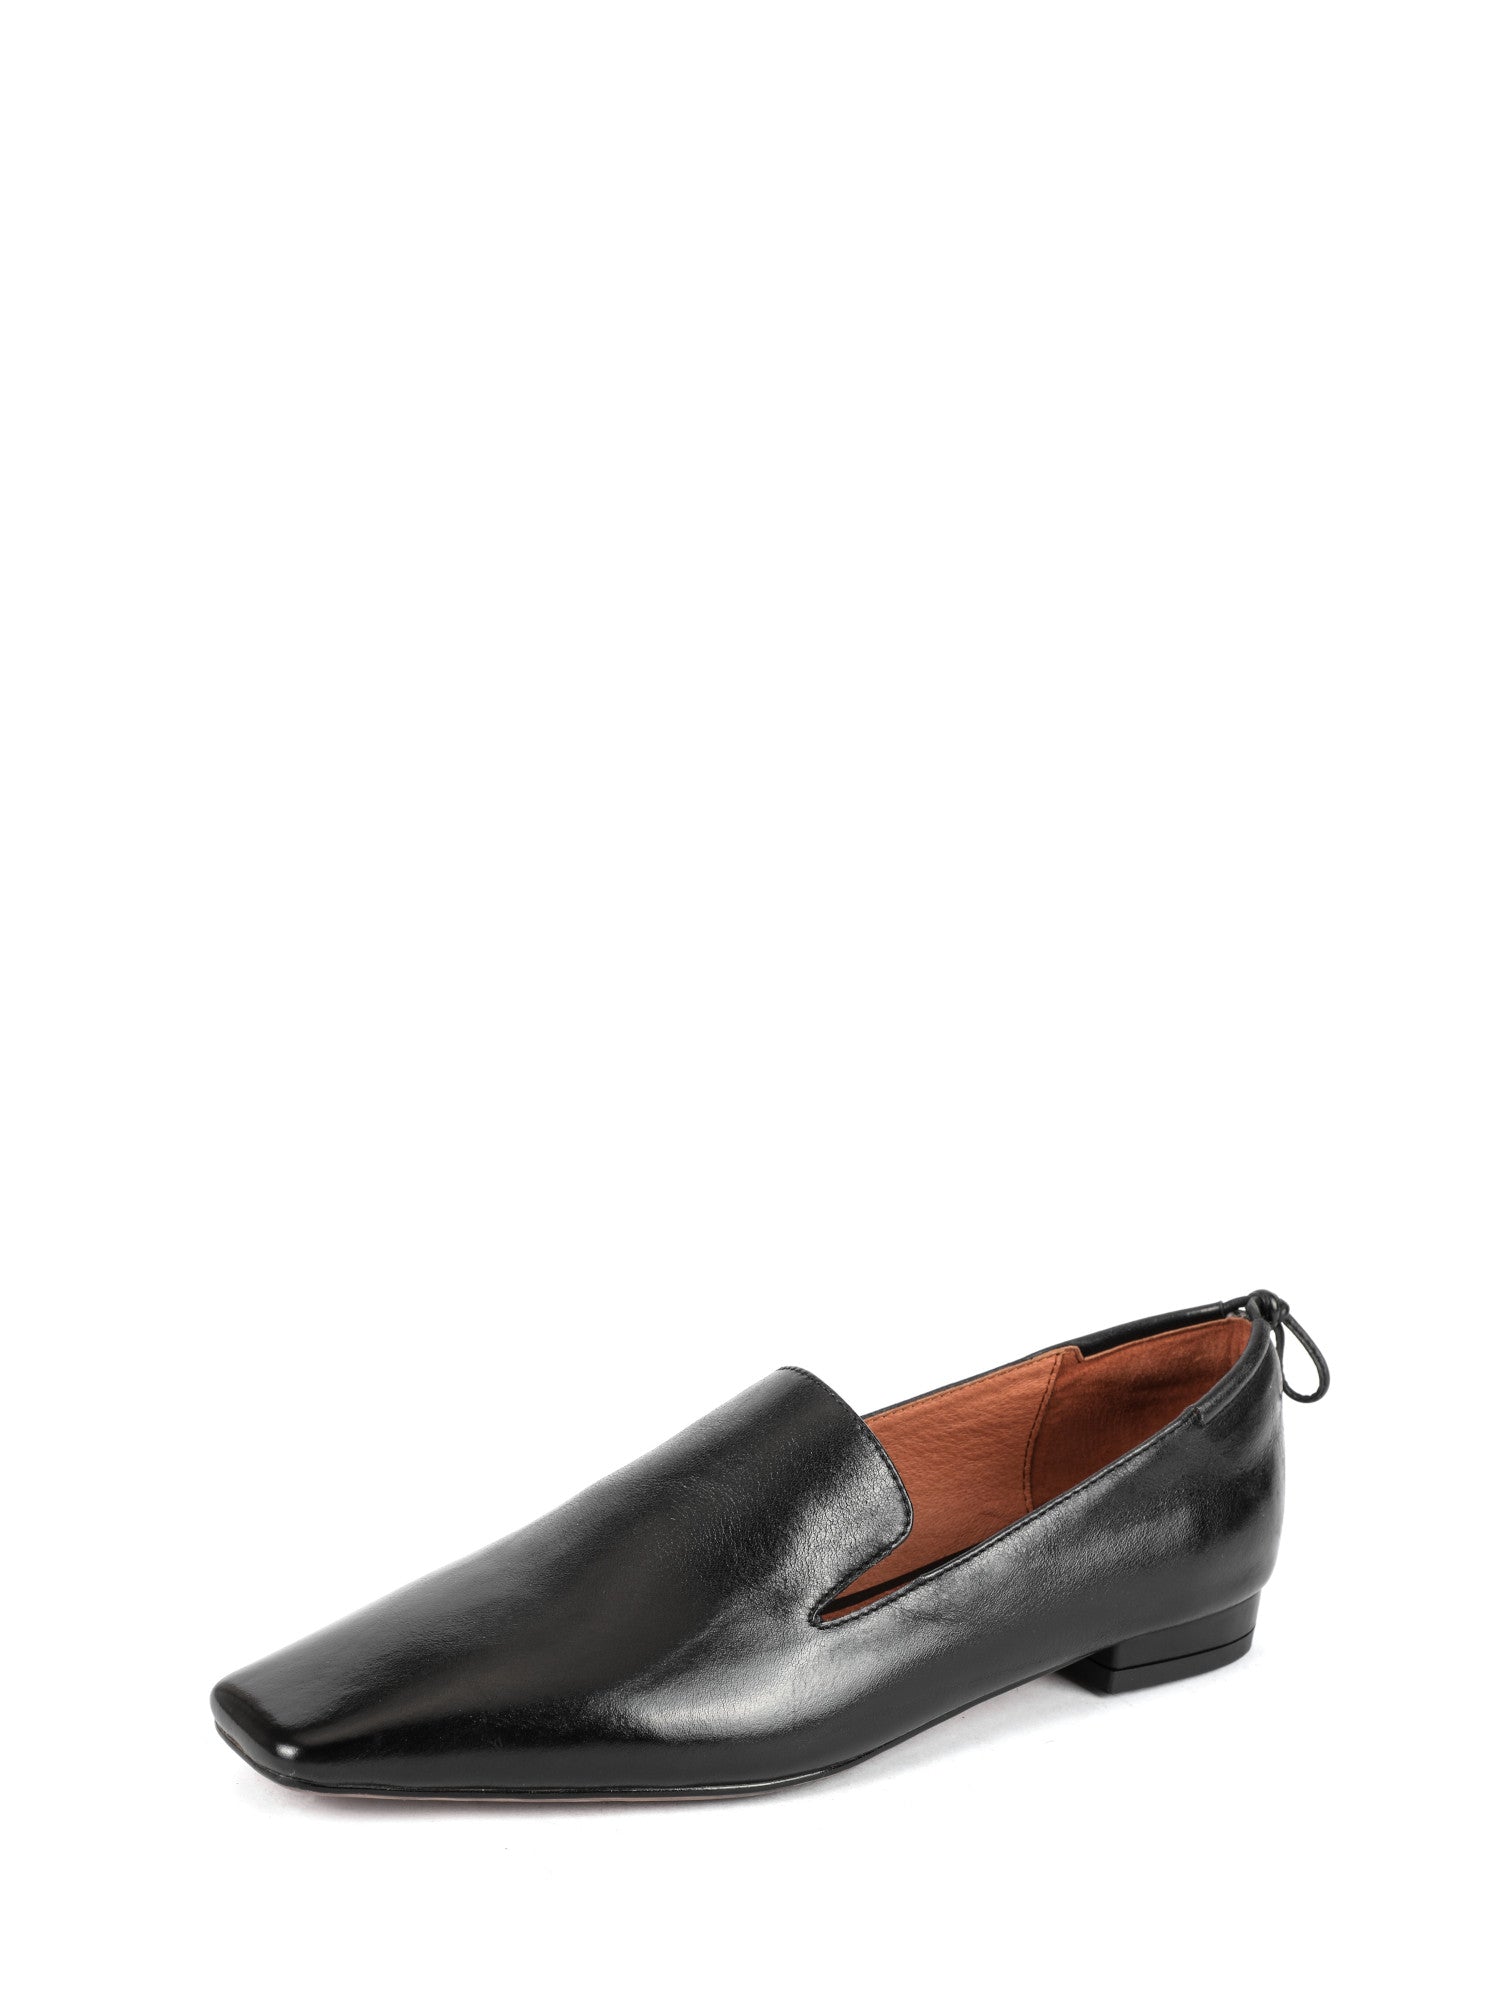 Gile-Black-Leather-Flat-Loafers-1